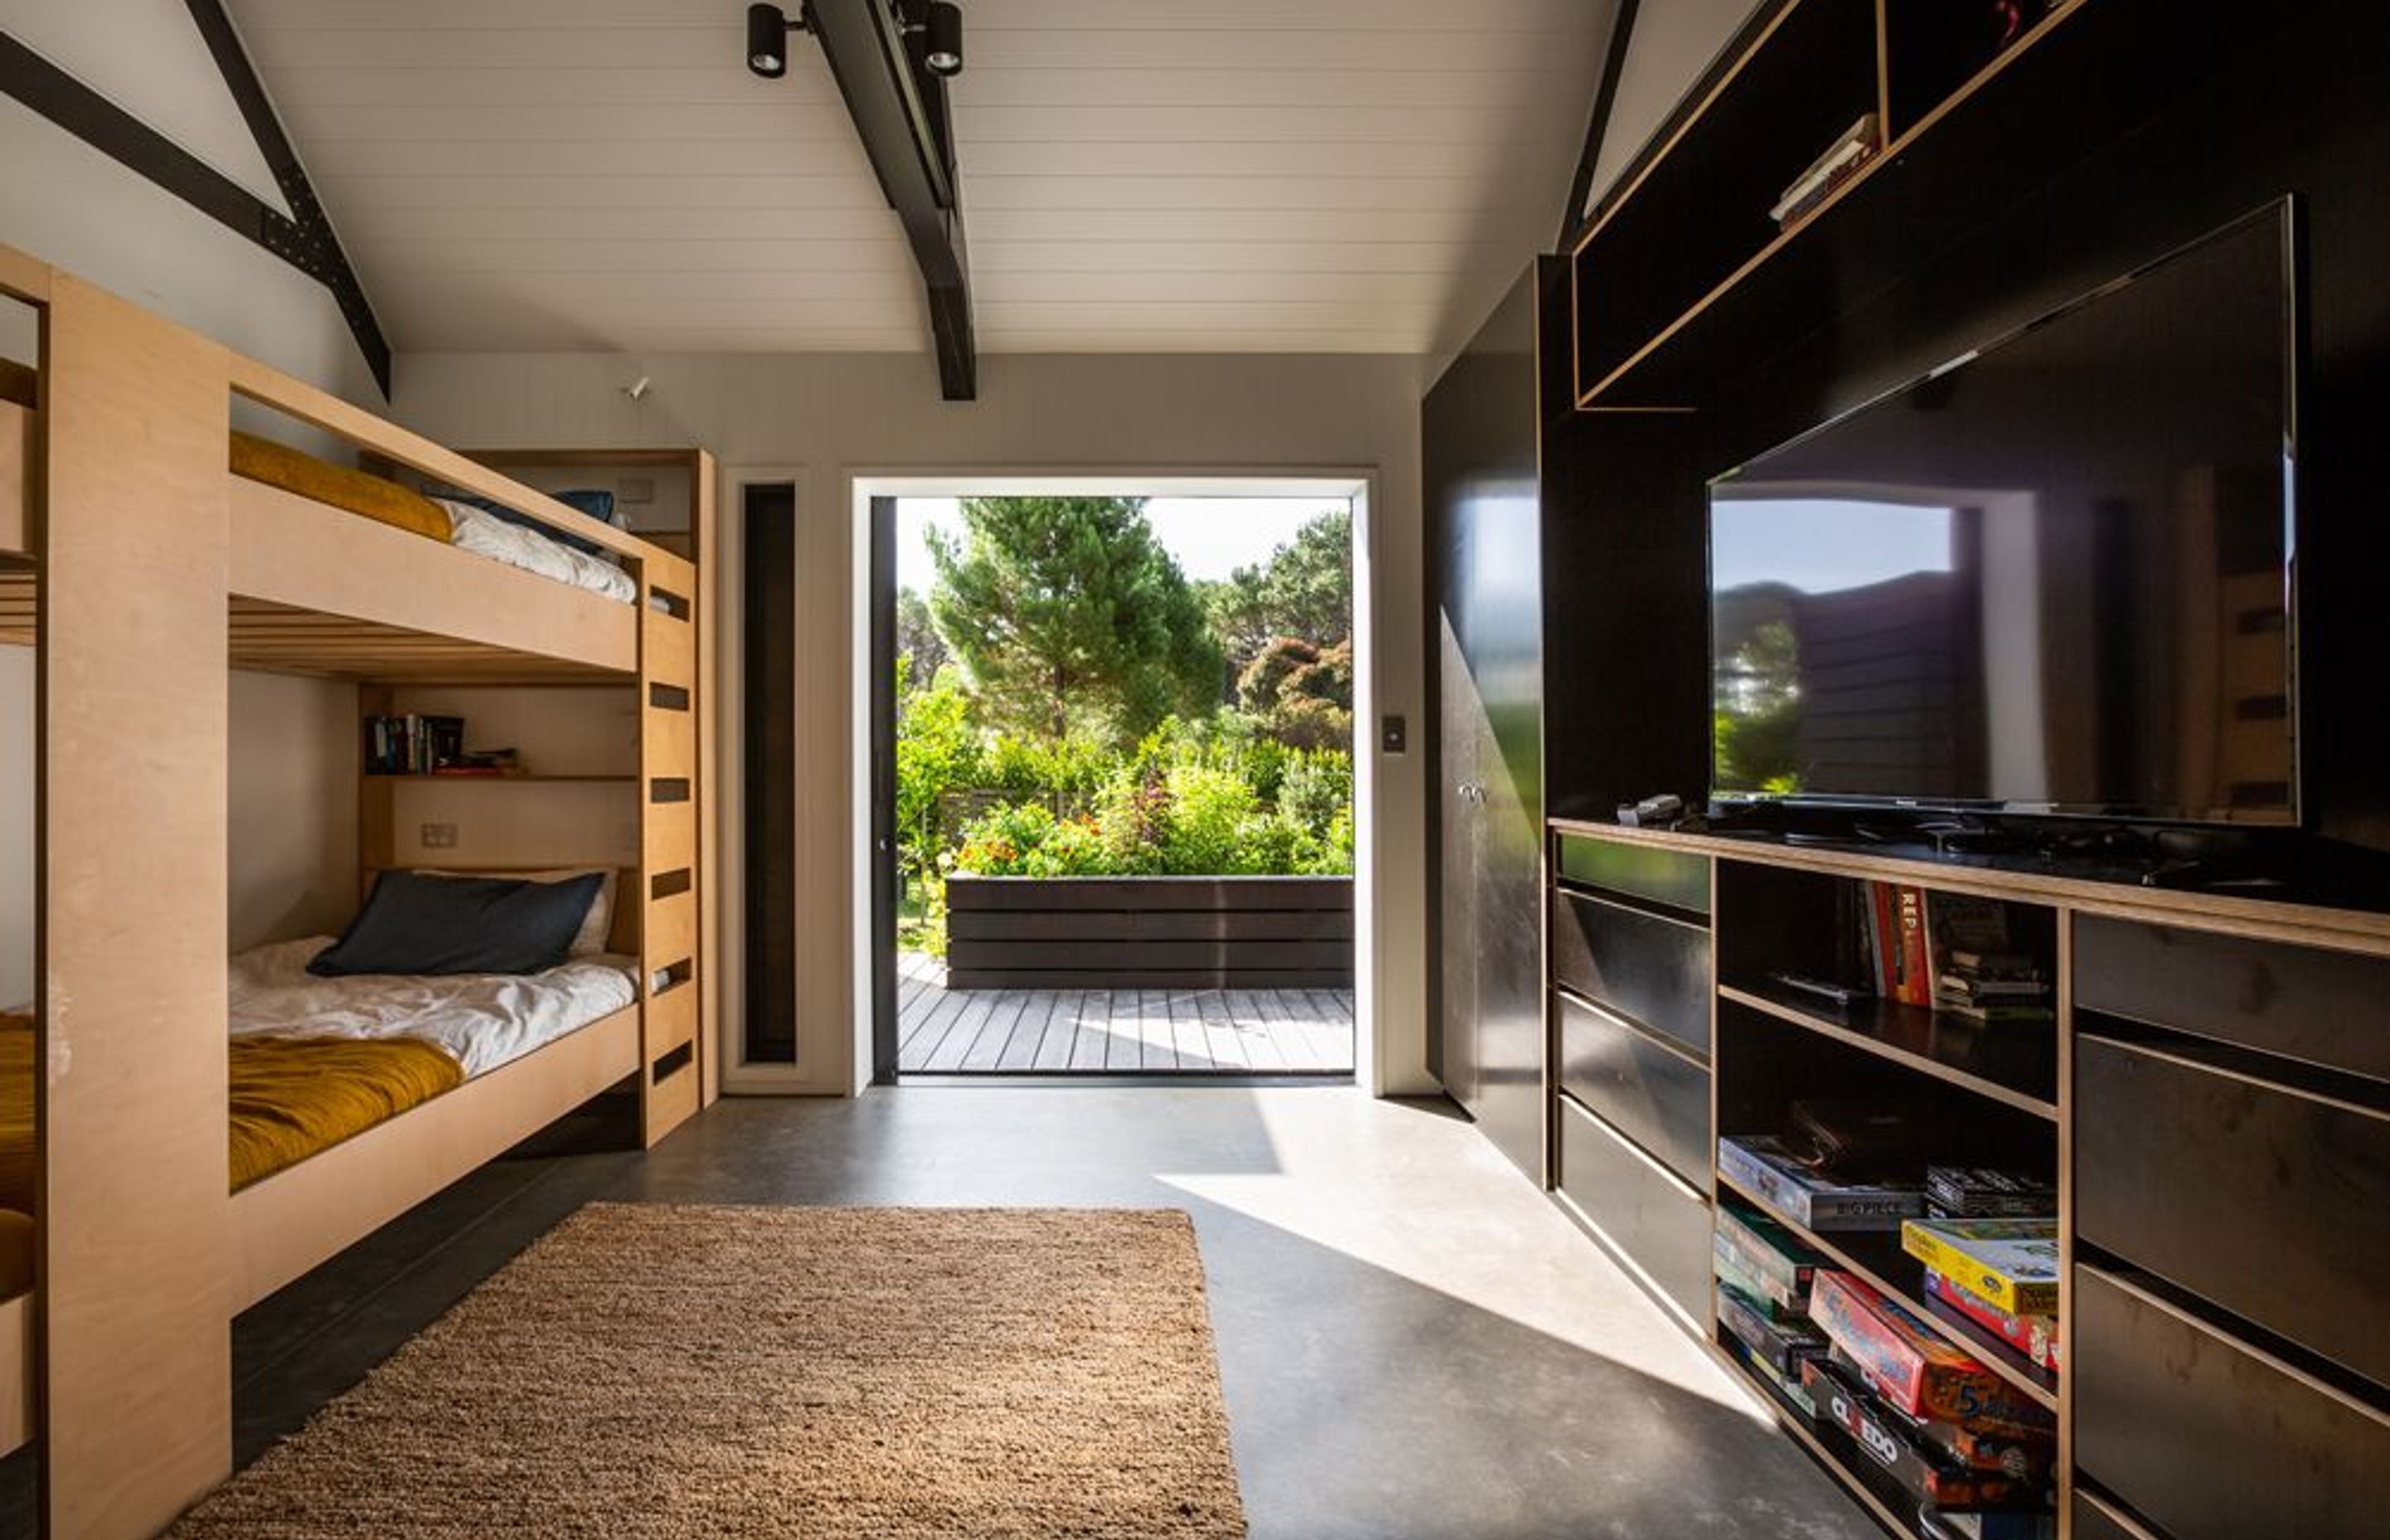 A bunkroom allows for additonal guests to stay.